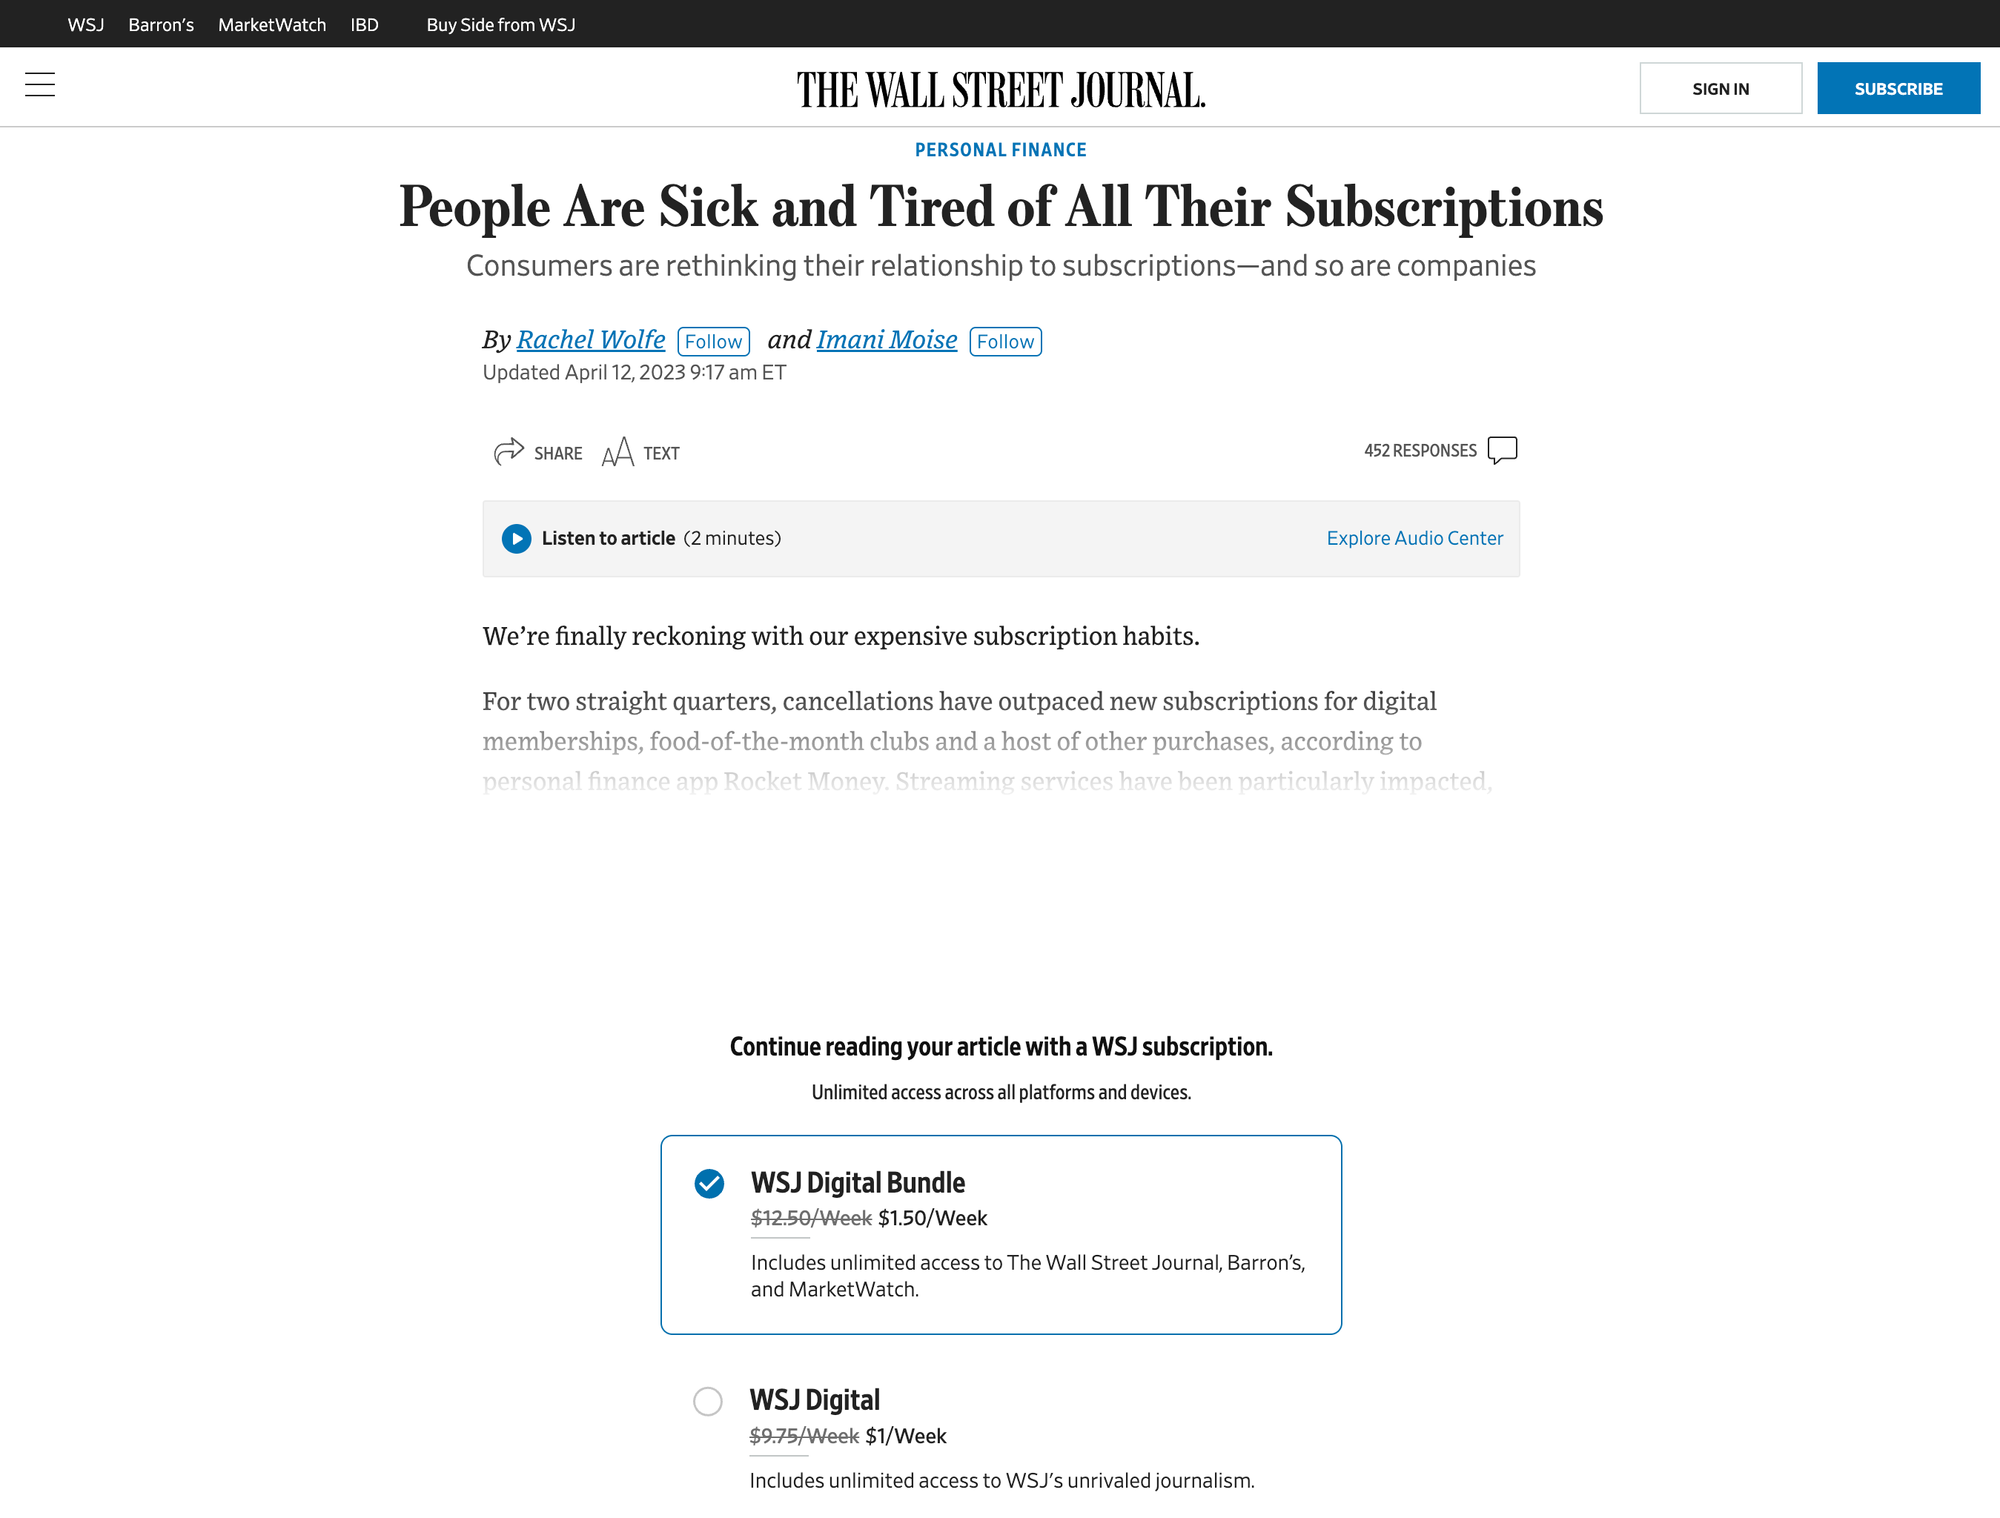 Screenshot of a Wall Street Journal post titled "People are Sick and Tired of All Their Subscriptions", with a subscription paywall obscuring all beyond the first few sentences